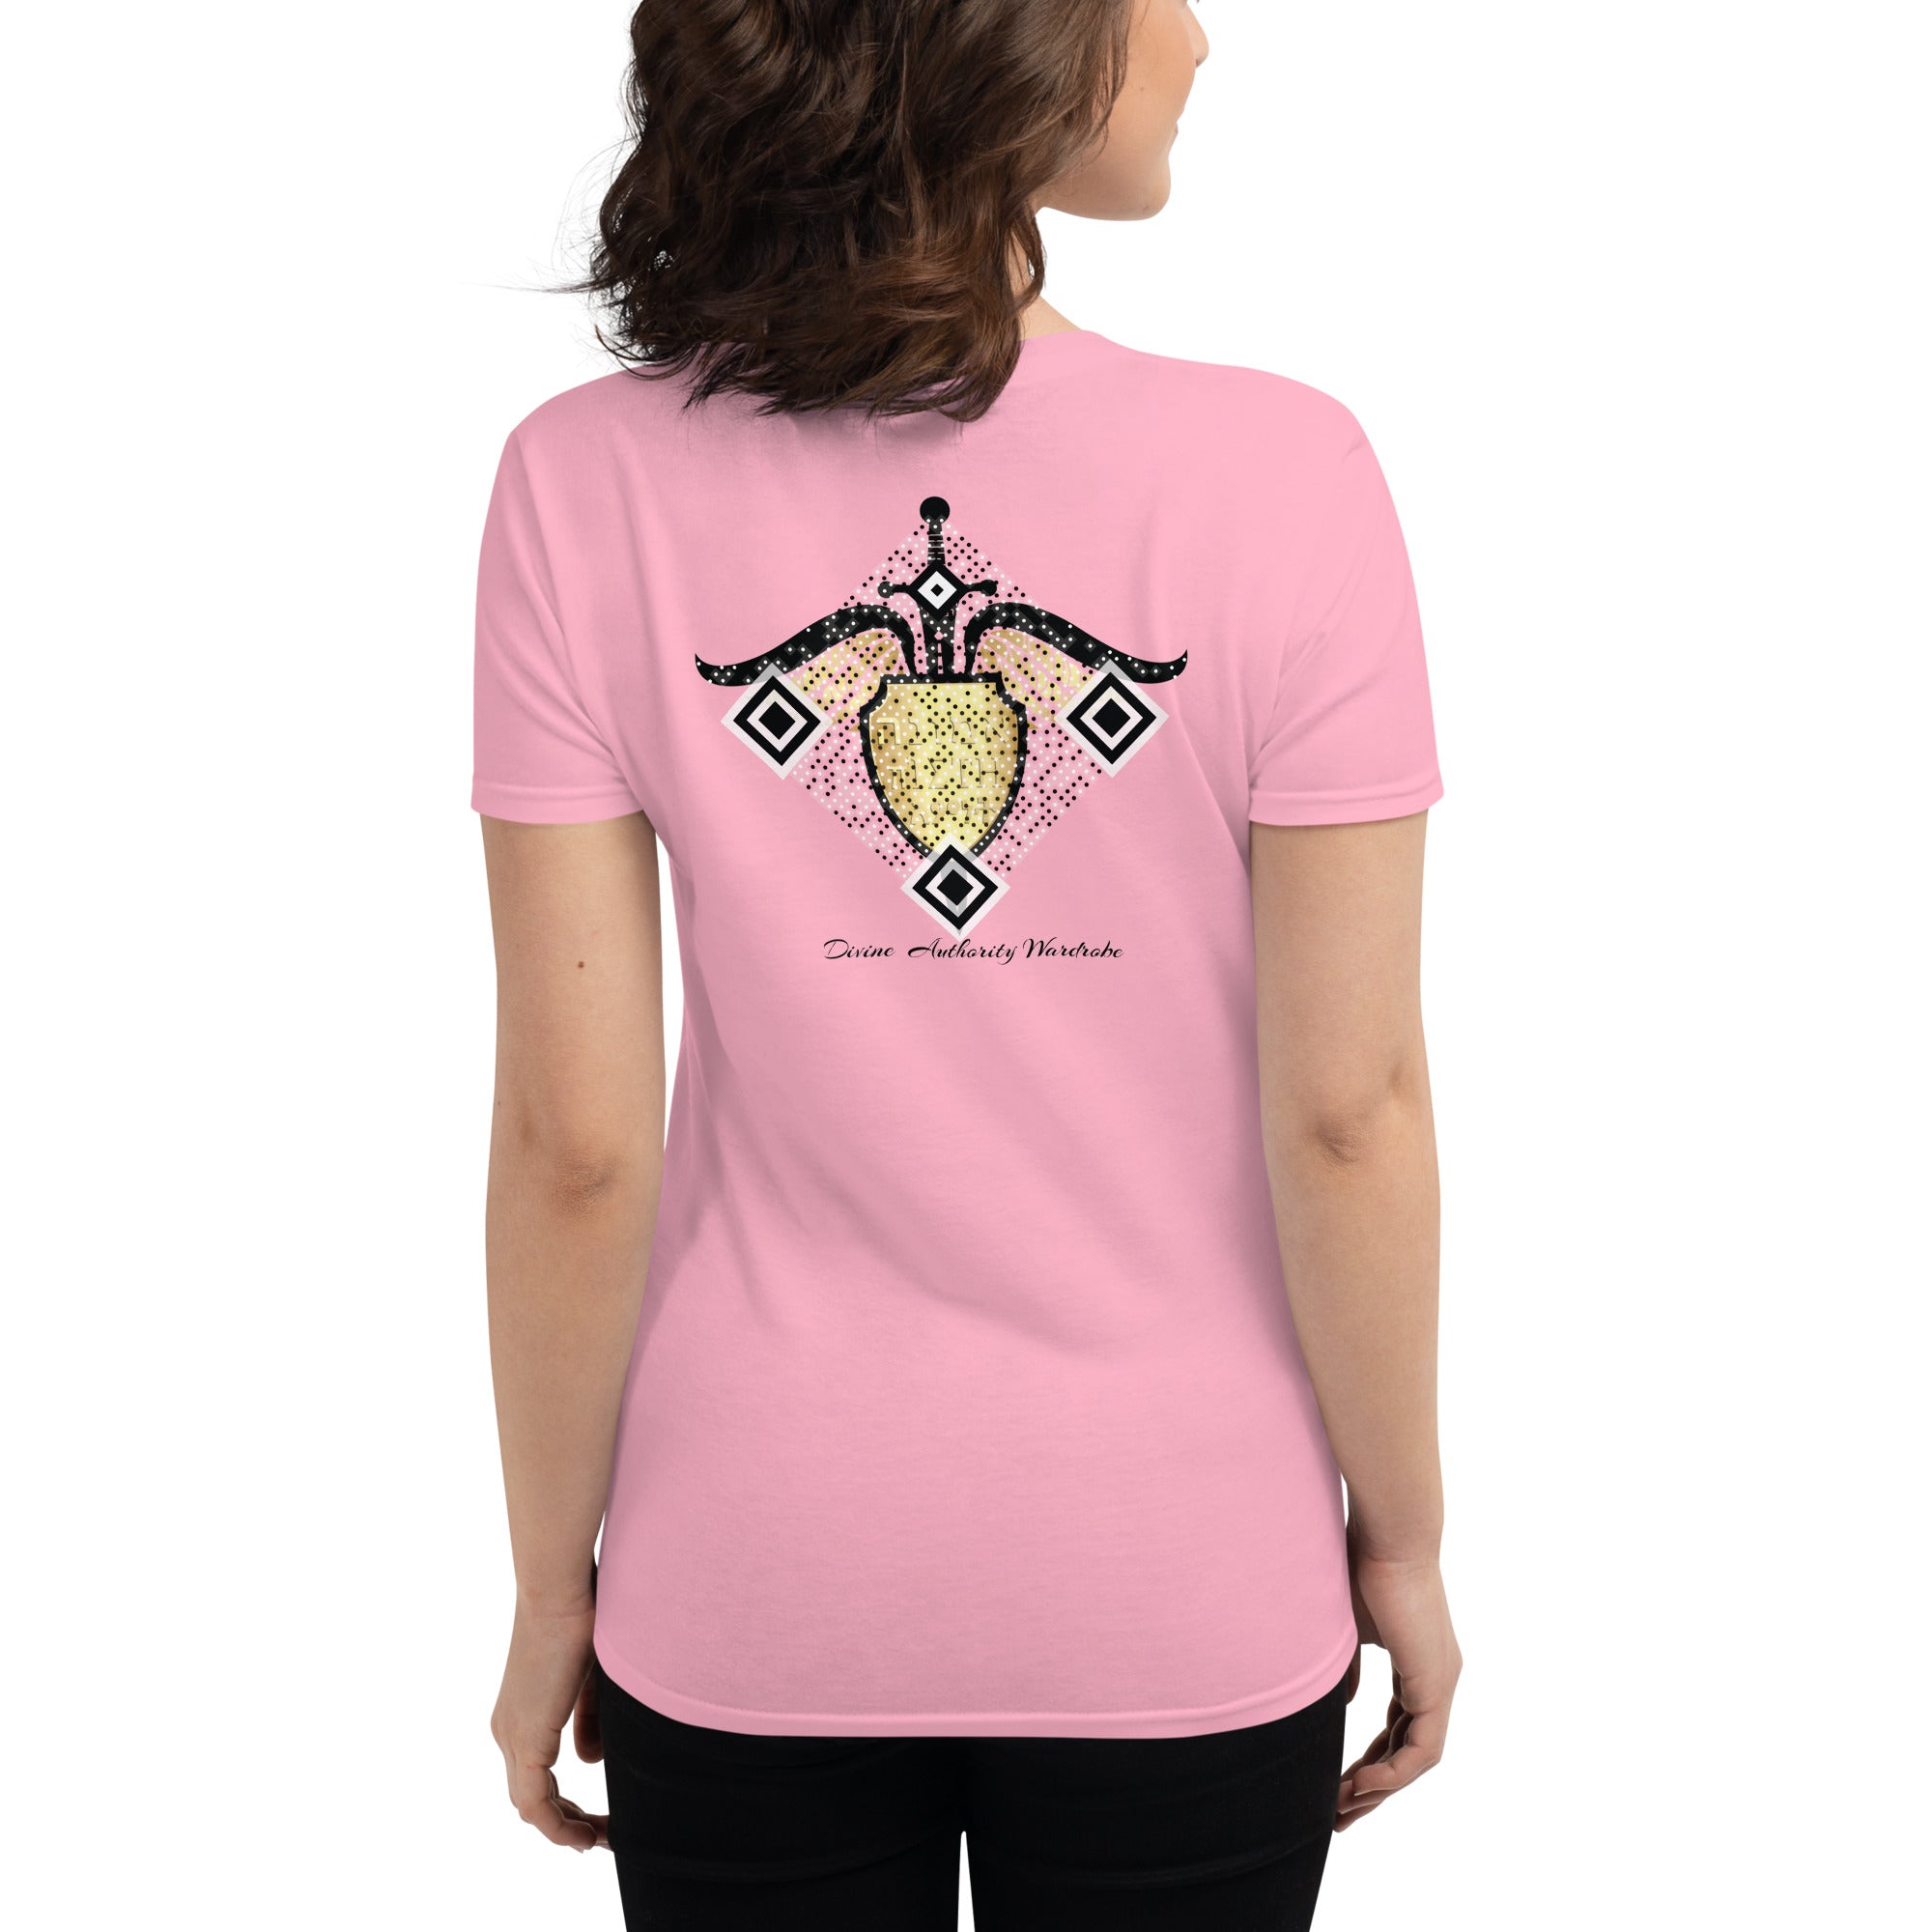 In His Name Women's short sleeve t-shirt